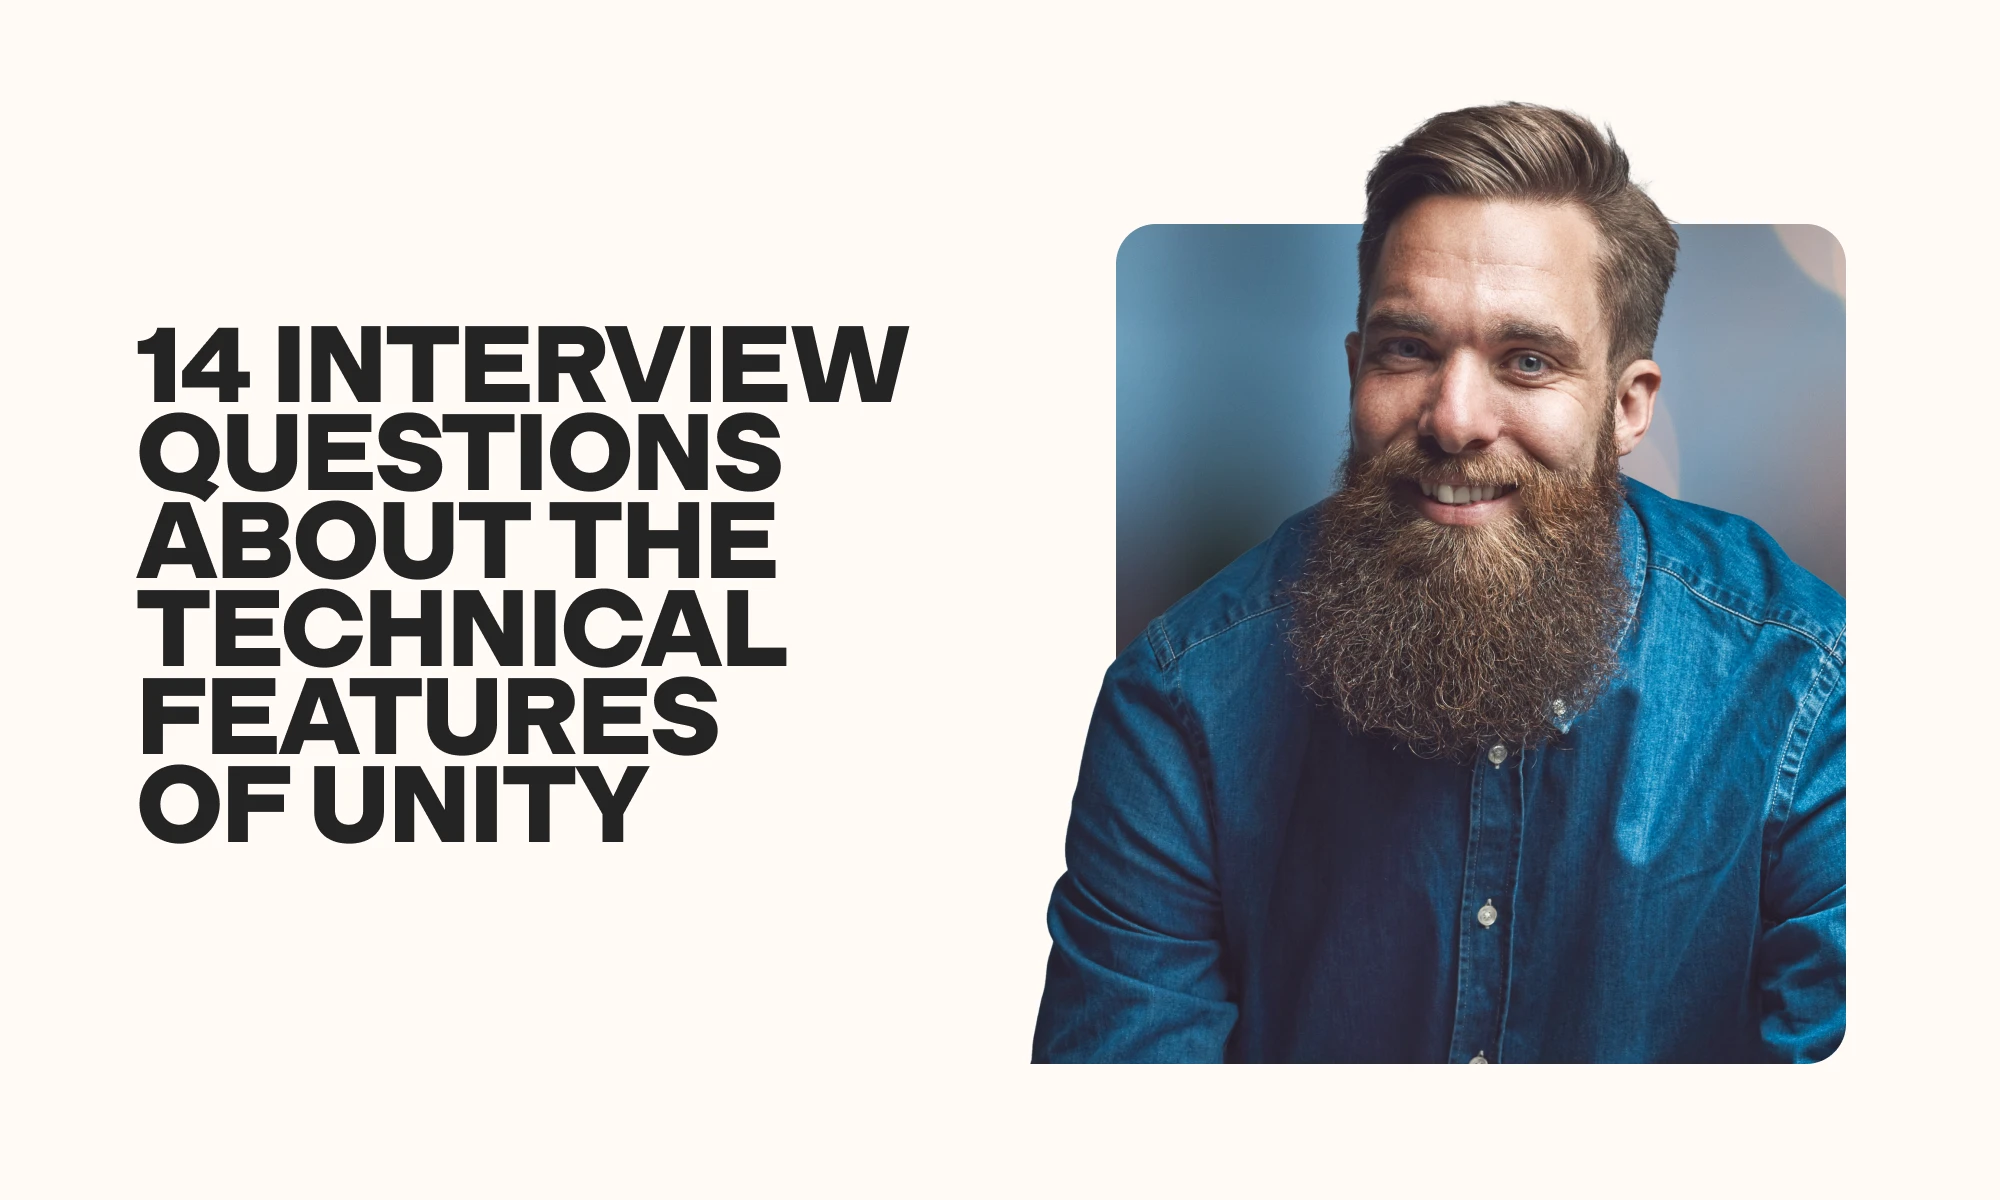 14 interview questions about the technical features of Unity